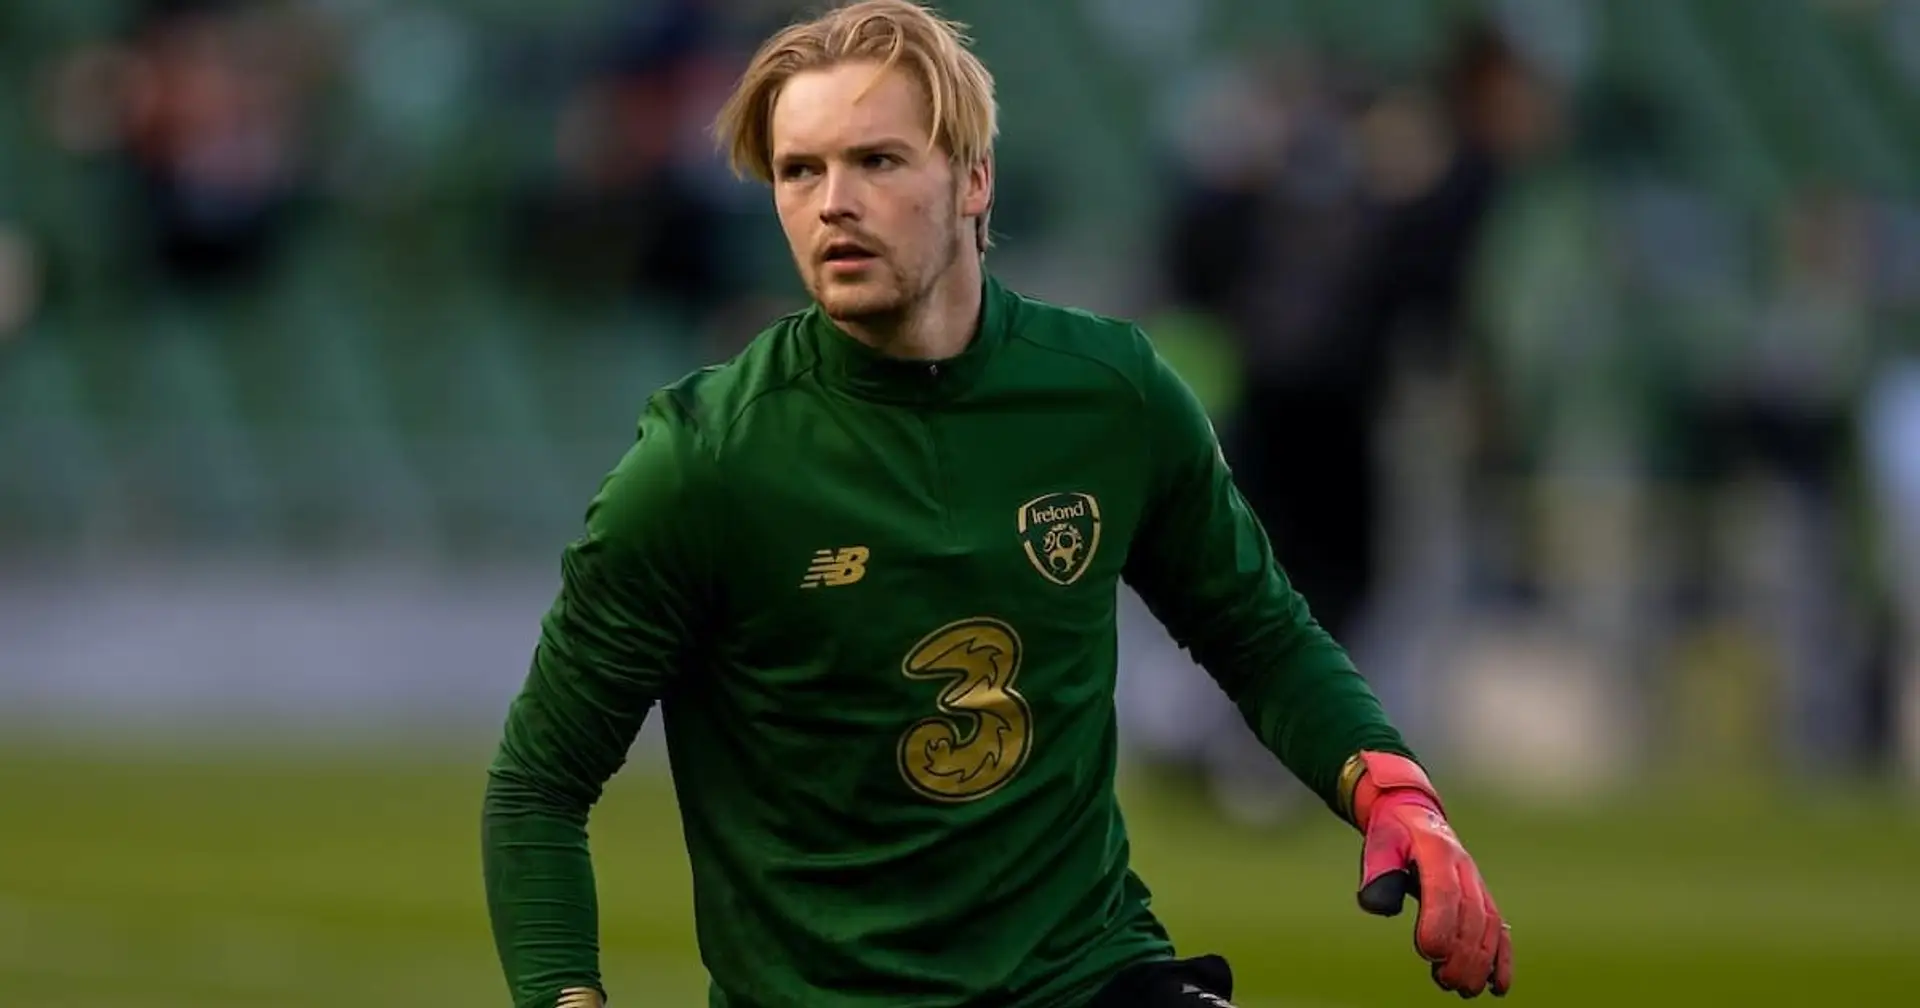 Caoimhin Kelleher impresses on Ireland debut with clean sheet